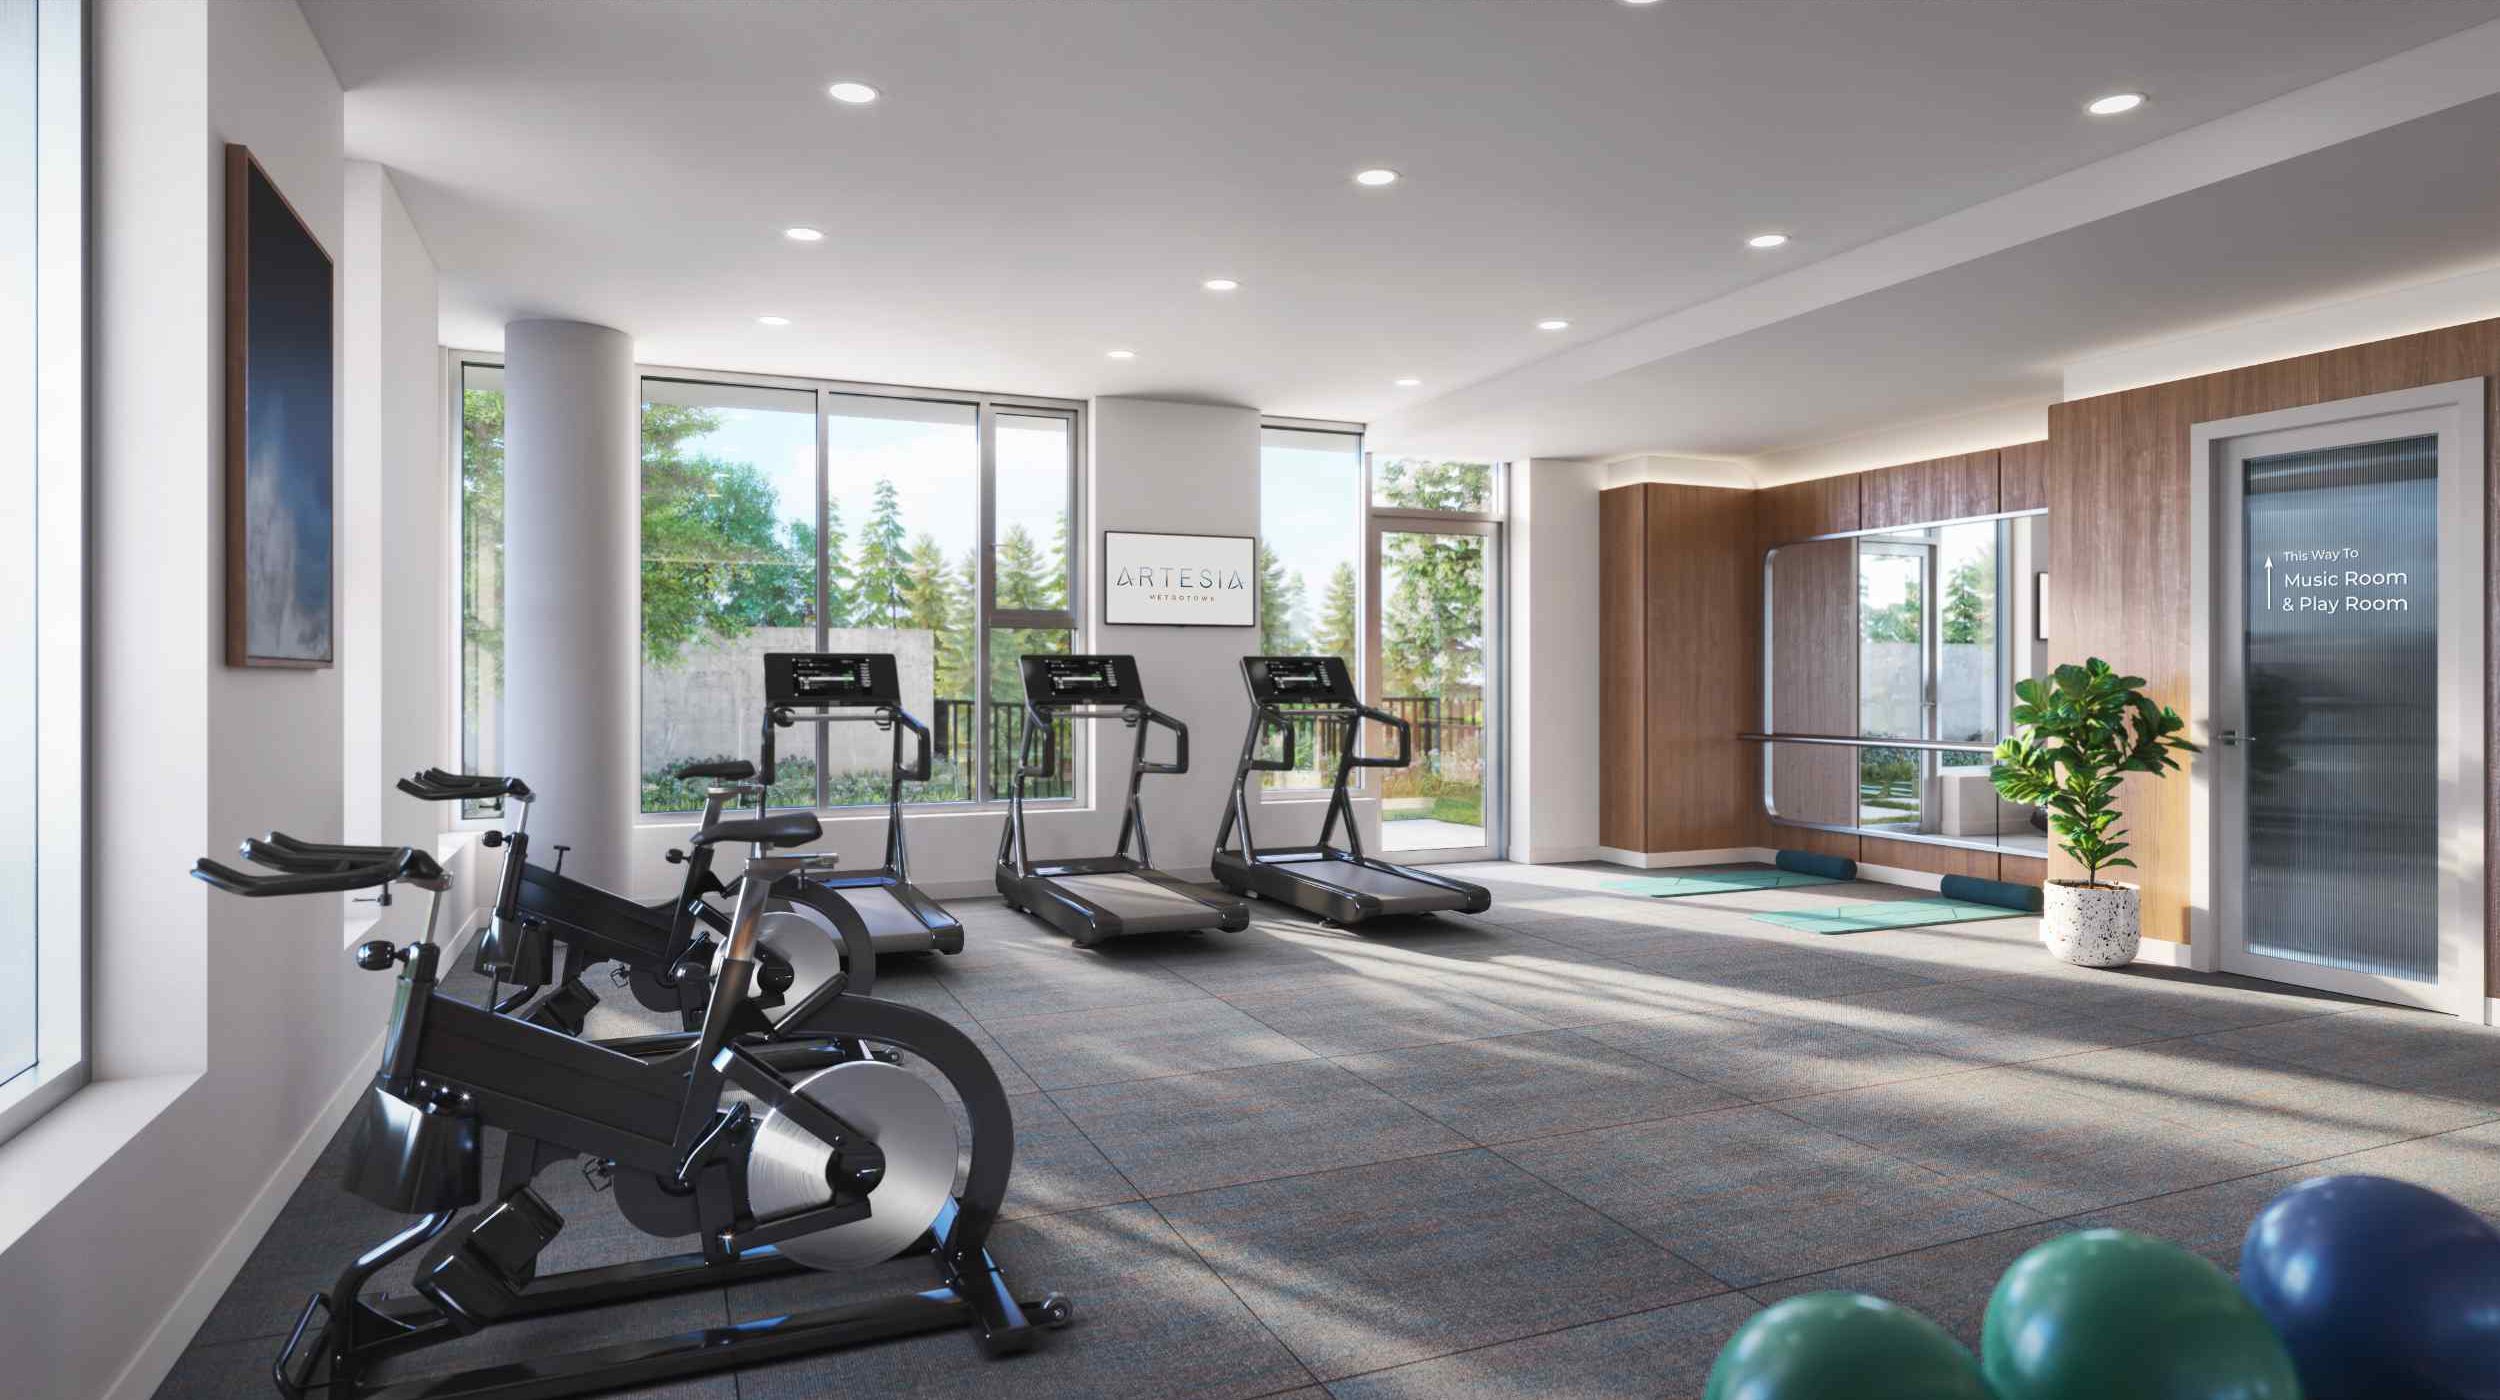 Workout in comfort year-round in our dedicated Fitness and Yoga Space that looks out to the inner courtyard.